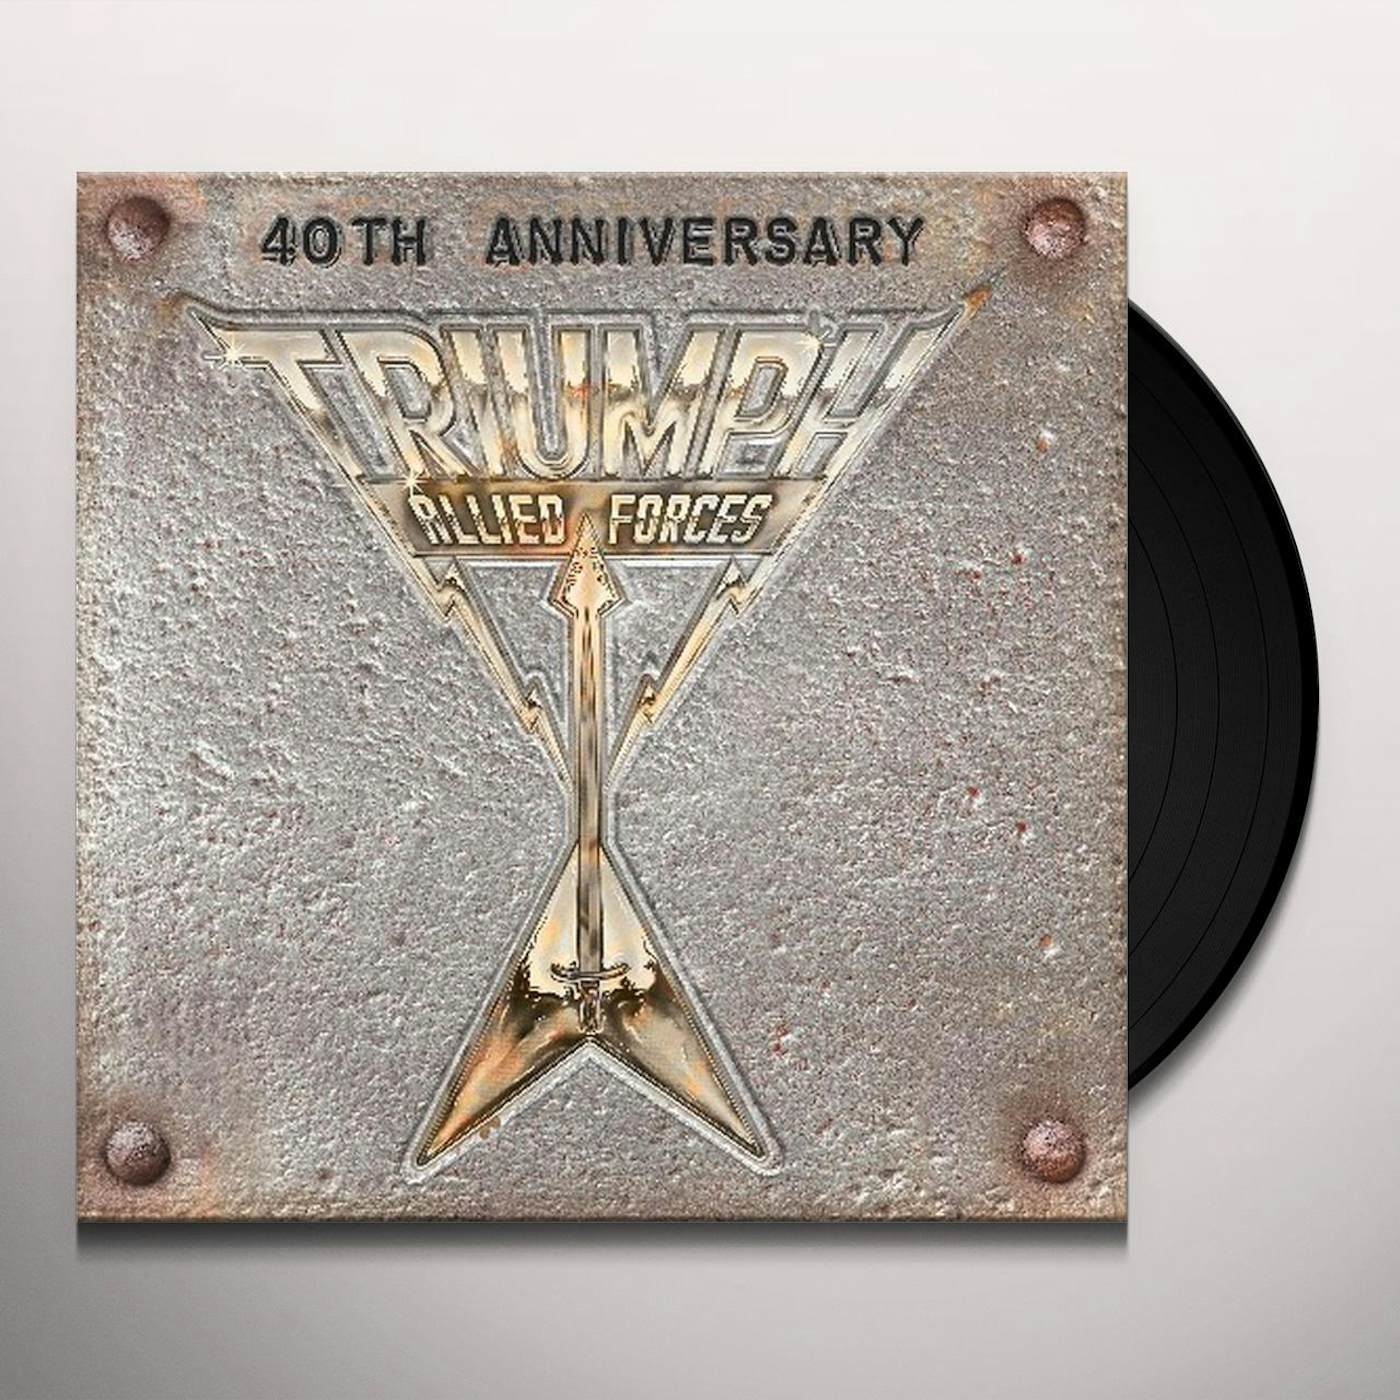 Triumph ALLIED FORCES: 40TH ANNIVERSARY Vinyl Record